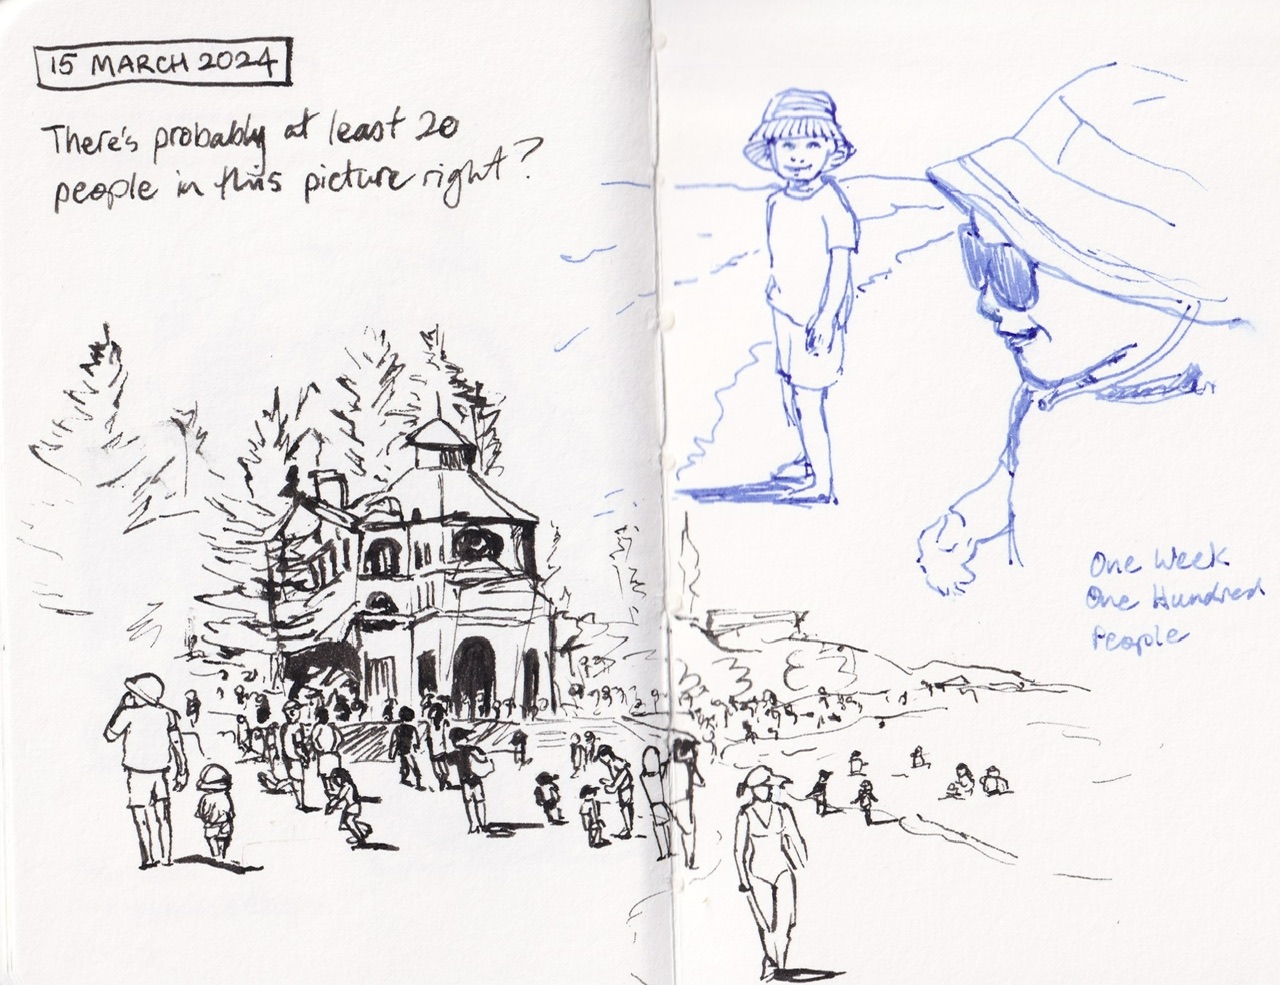 sketchbook 6 23.jpeg|Pen sketches of a crowd at the beach, sketches of two kids at the beach in blue ink